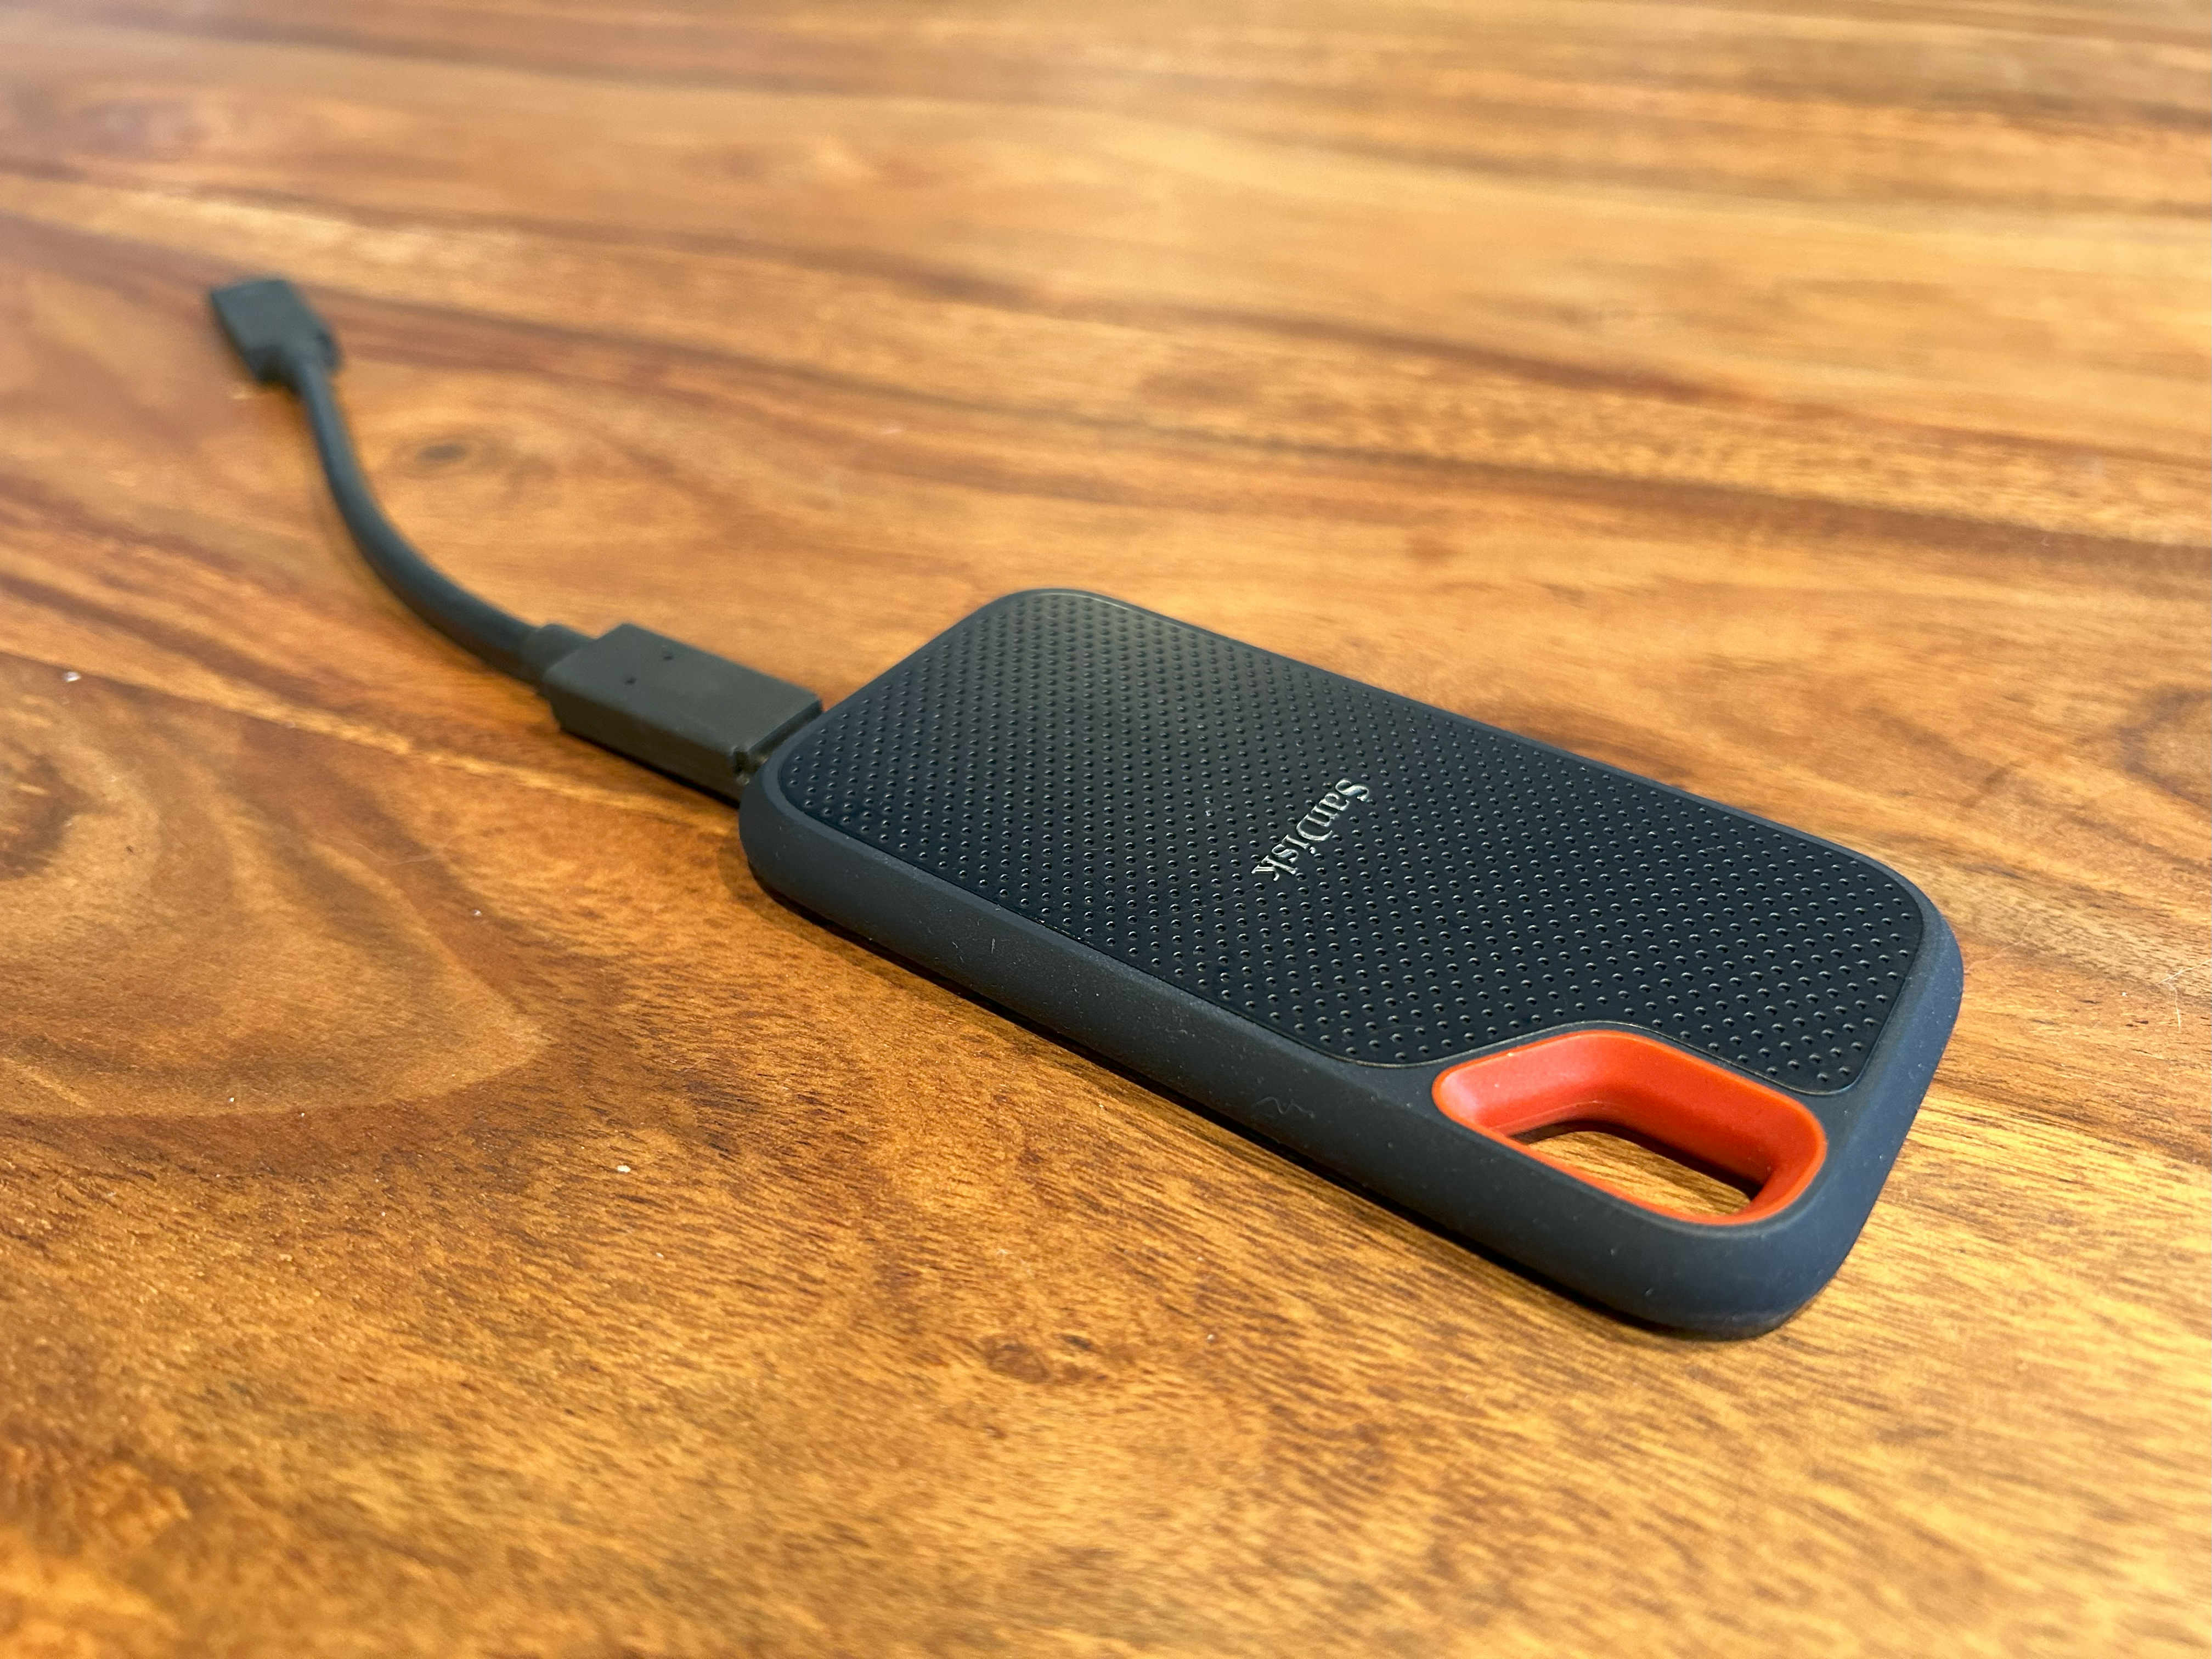 The Sandisk portable SSD